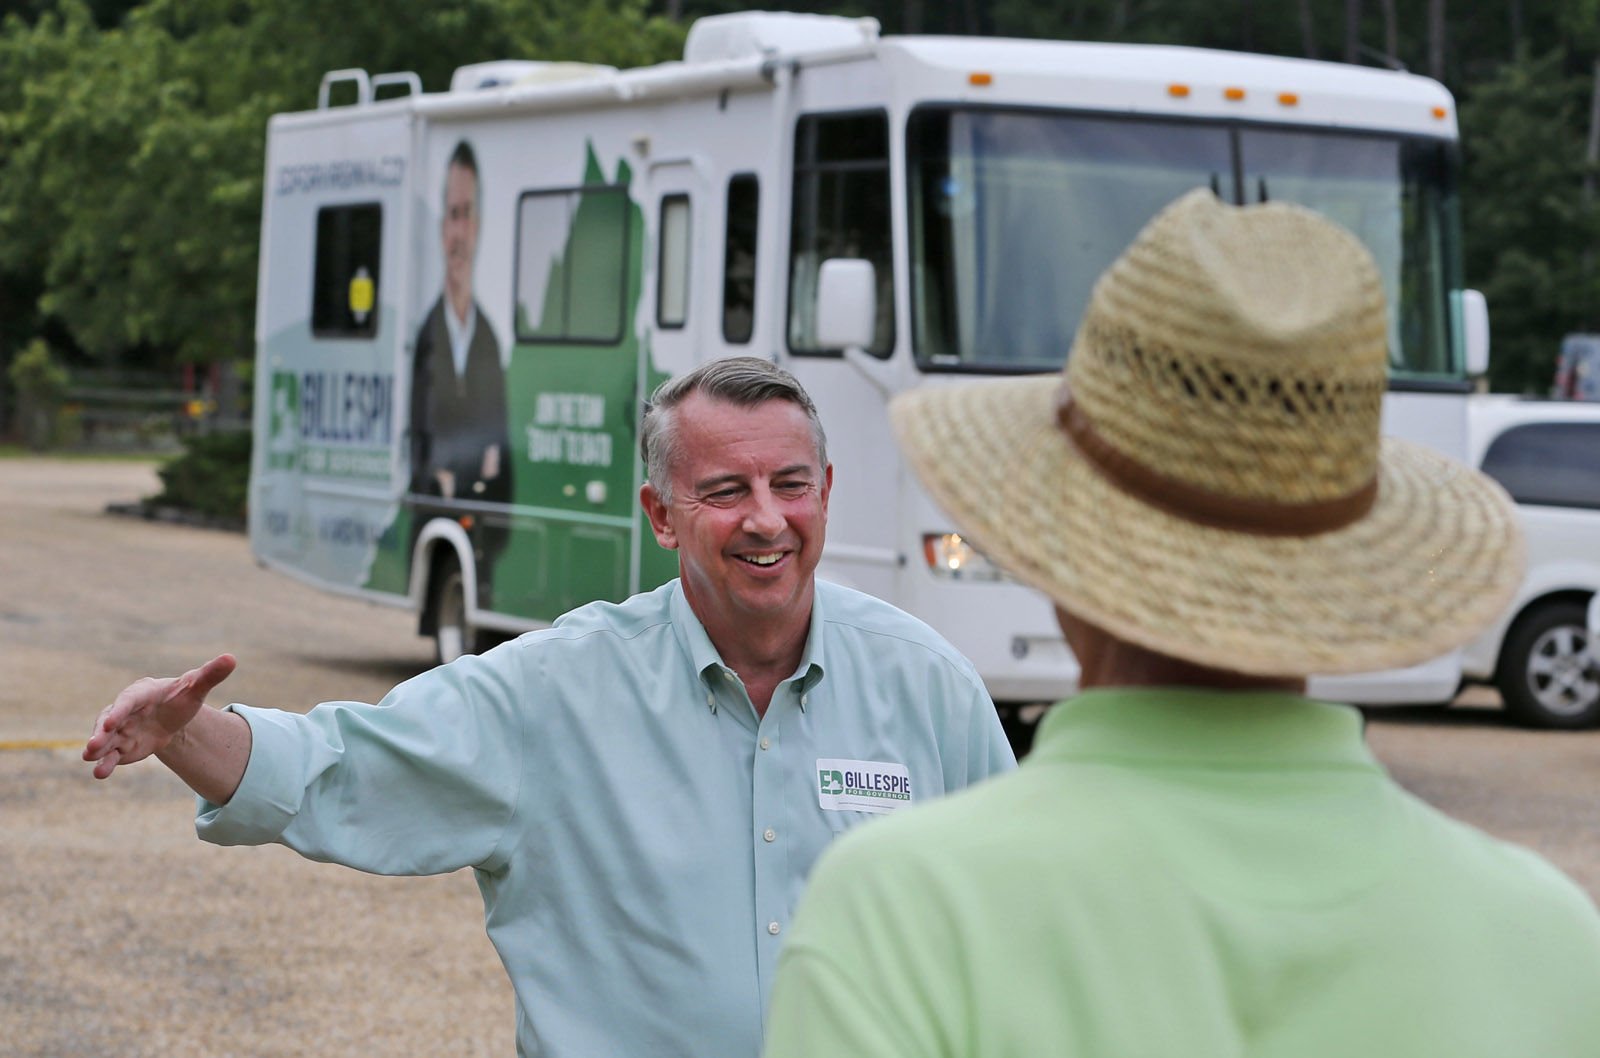 Republican candidate for governor, Ed Gillespie, greets voters at a polling place Tuesday, June 13, 2017, in Richmond, Va. Gillespie faces State Sen. Frank Wagner and Corey Stewart in today's primary. (AP Photo/Steve Helber)